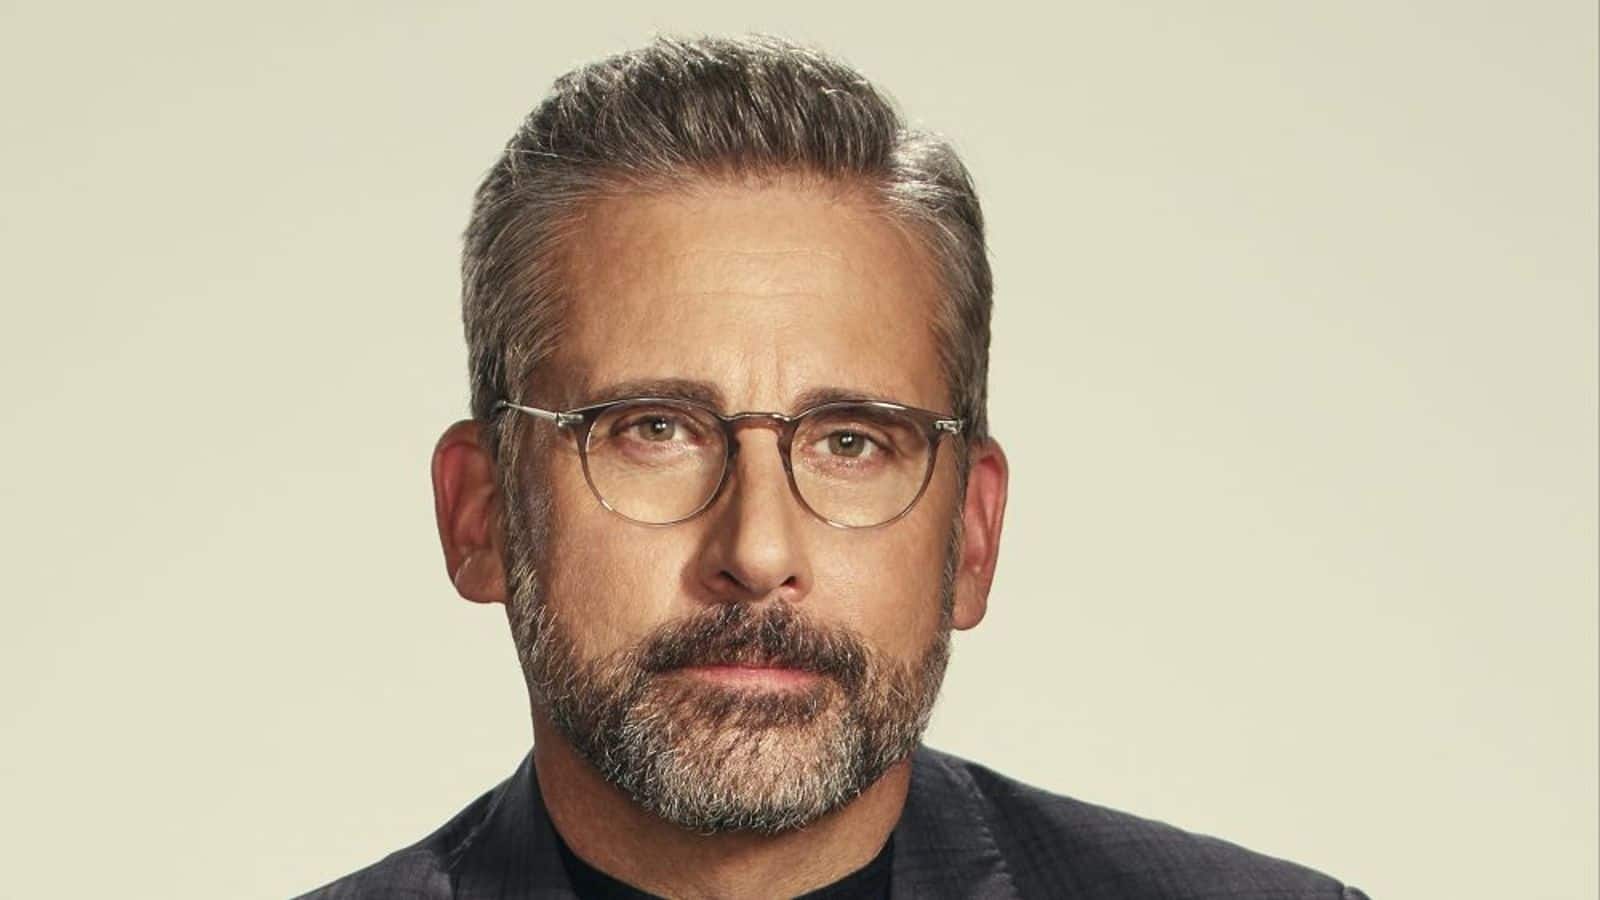 Steve Carell joins Tina Fey in Netflix's 'The Four Seasons'